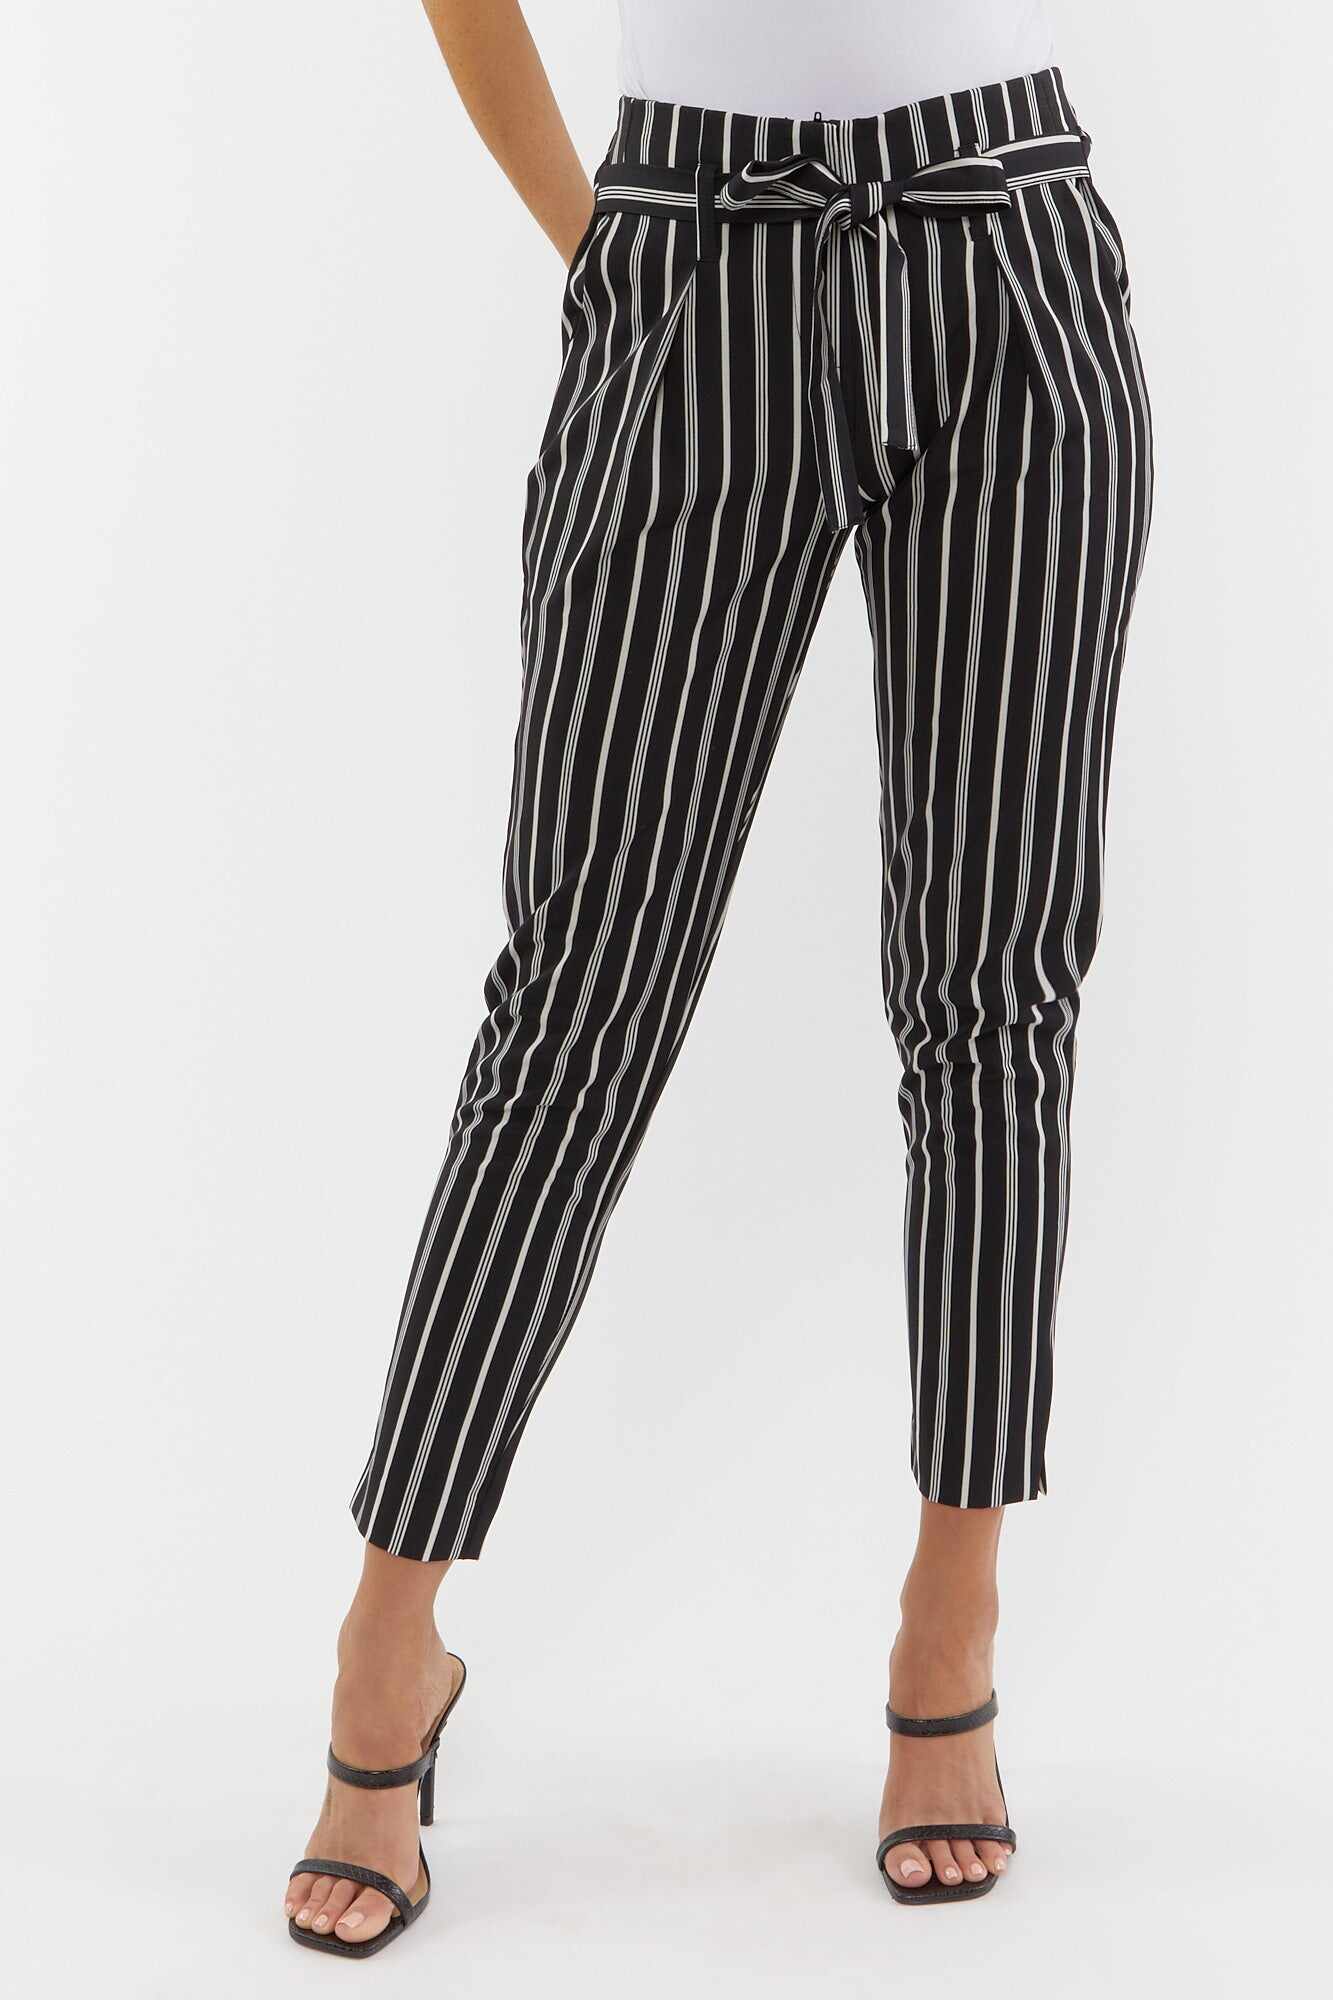 Women Apparel | Paperbag Striped Pants Black with White Forever21 - RL21728